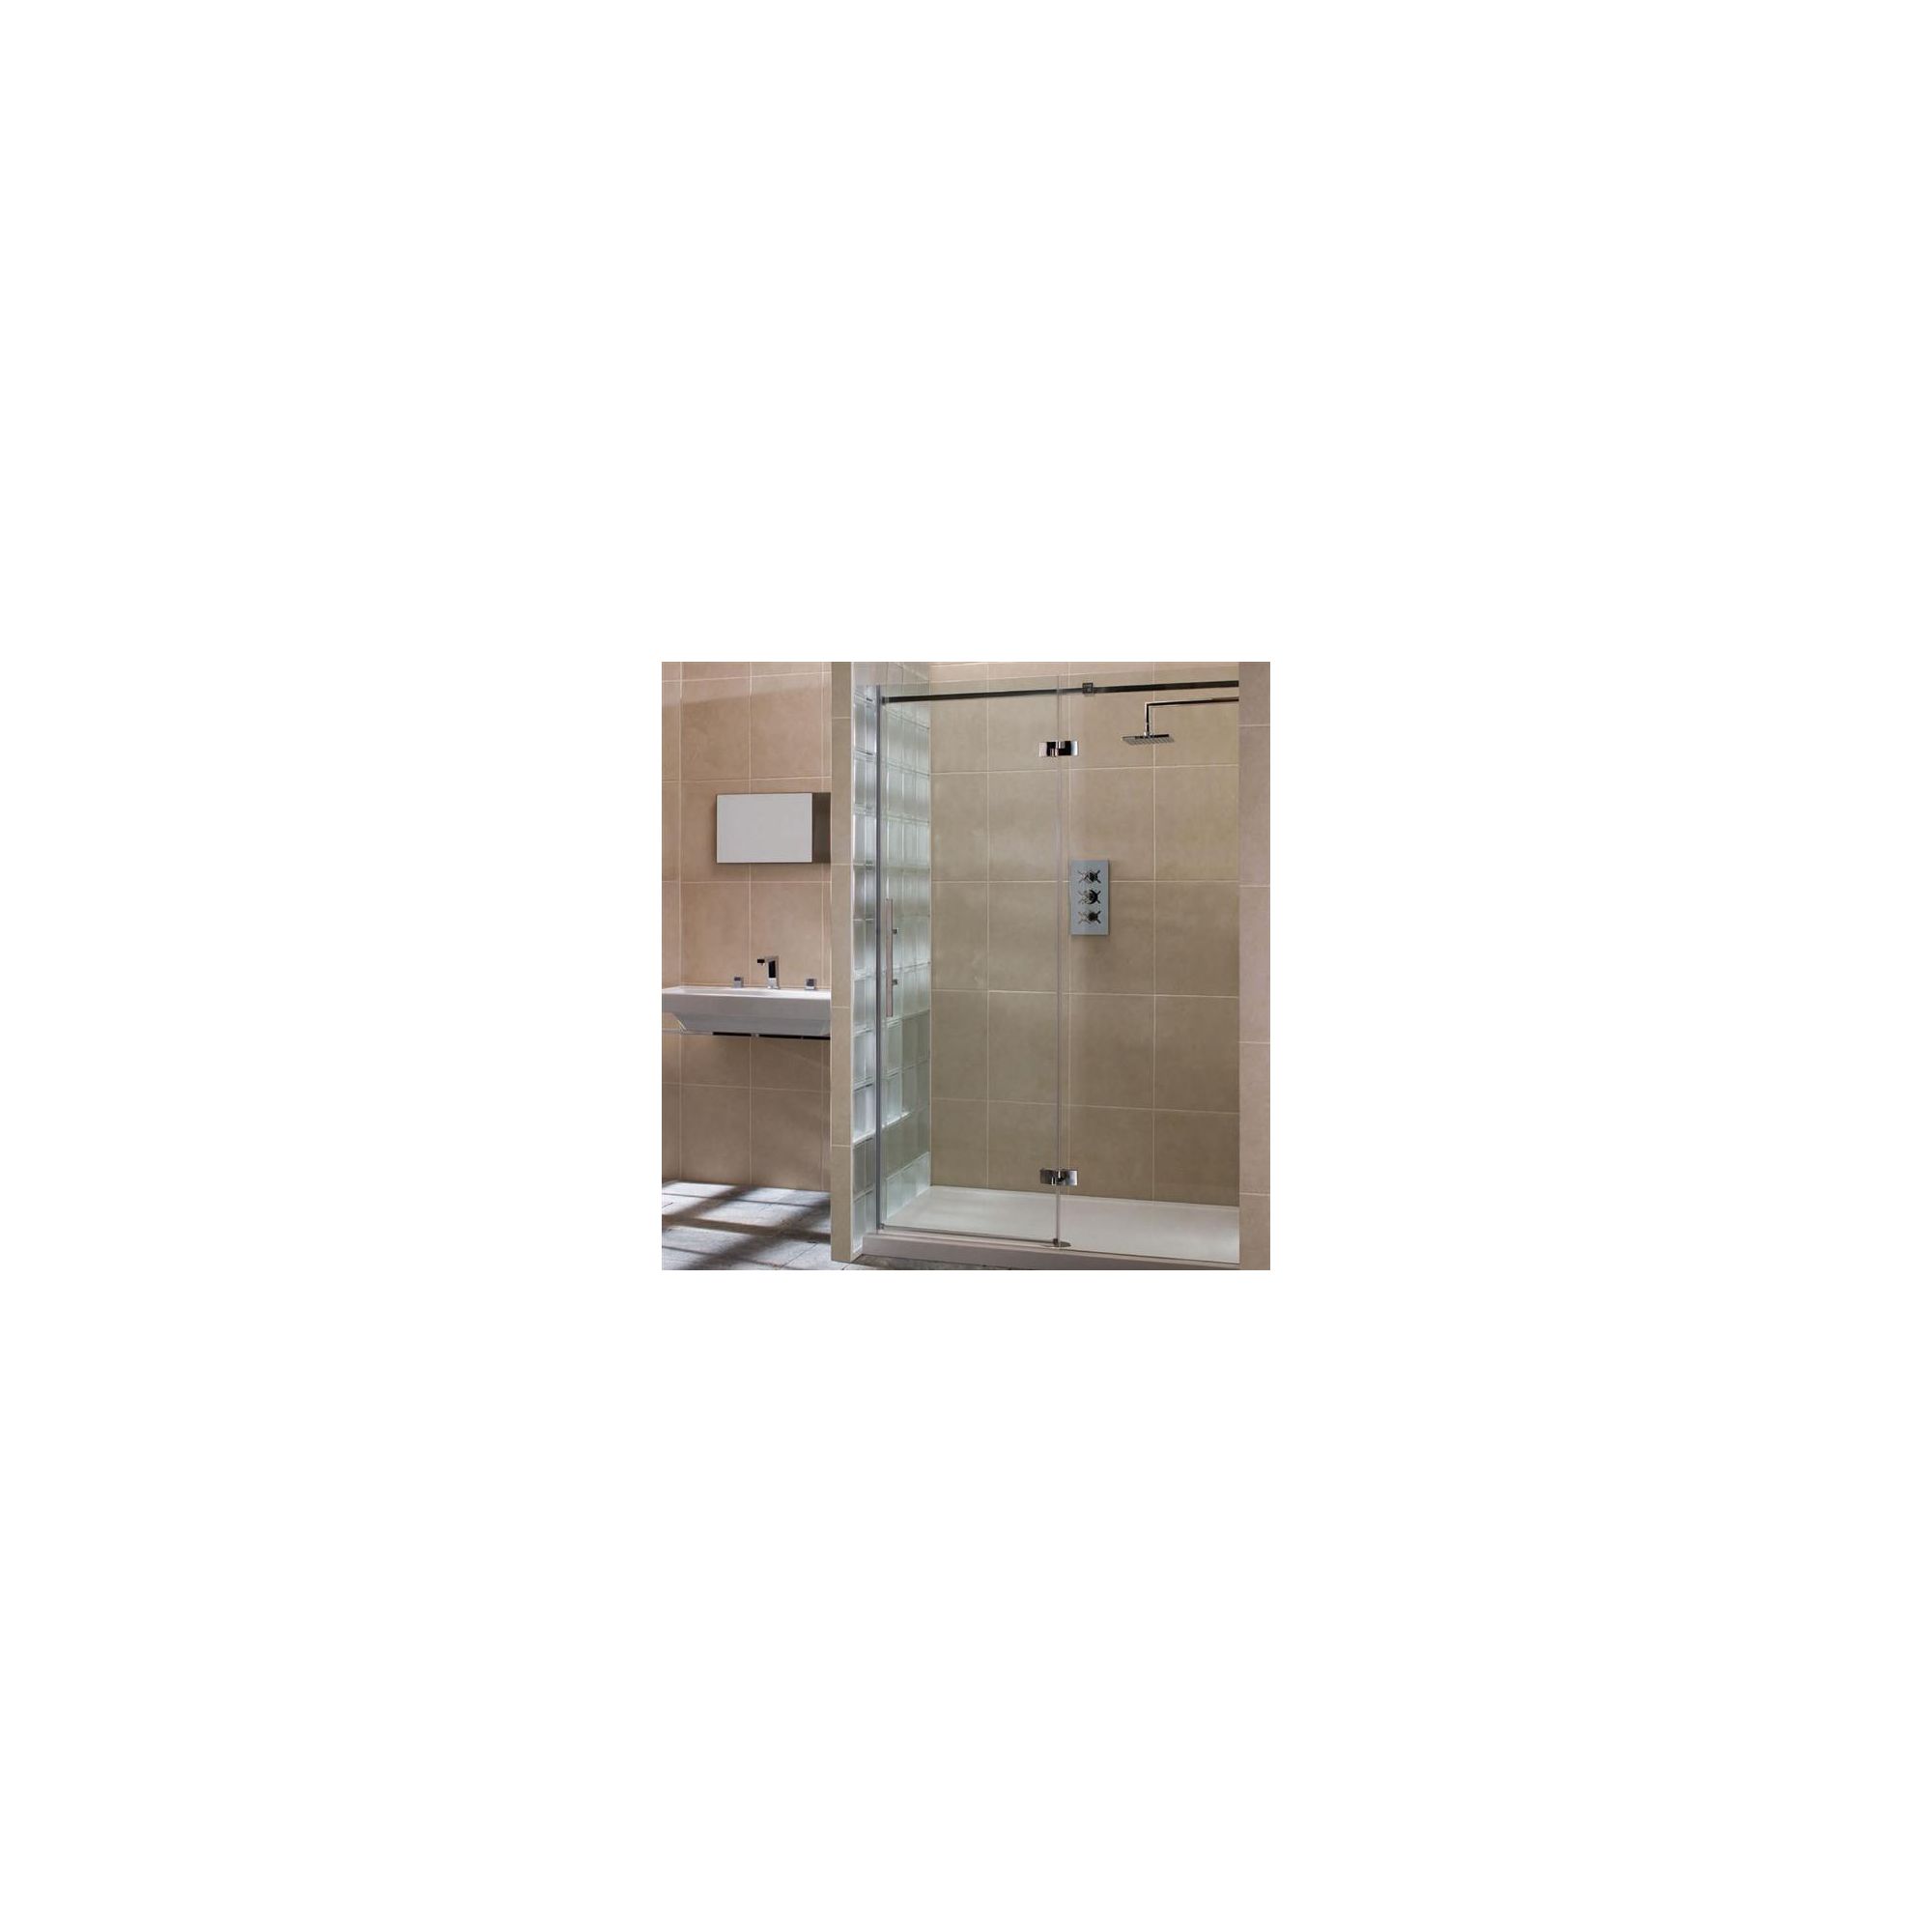 Merlyn Vivid Nine Hinged Door Alcove Shower Enclosure with Inline Panel, 1100mm x 800mm, Right Handed, Low Profile Tray, 8mm Glass at Tesco Direct